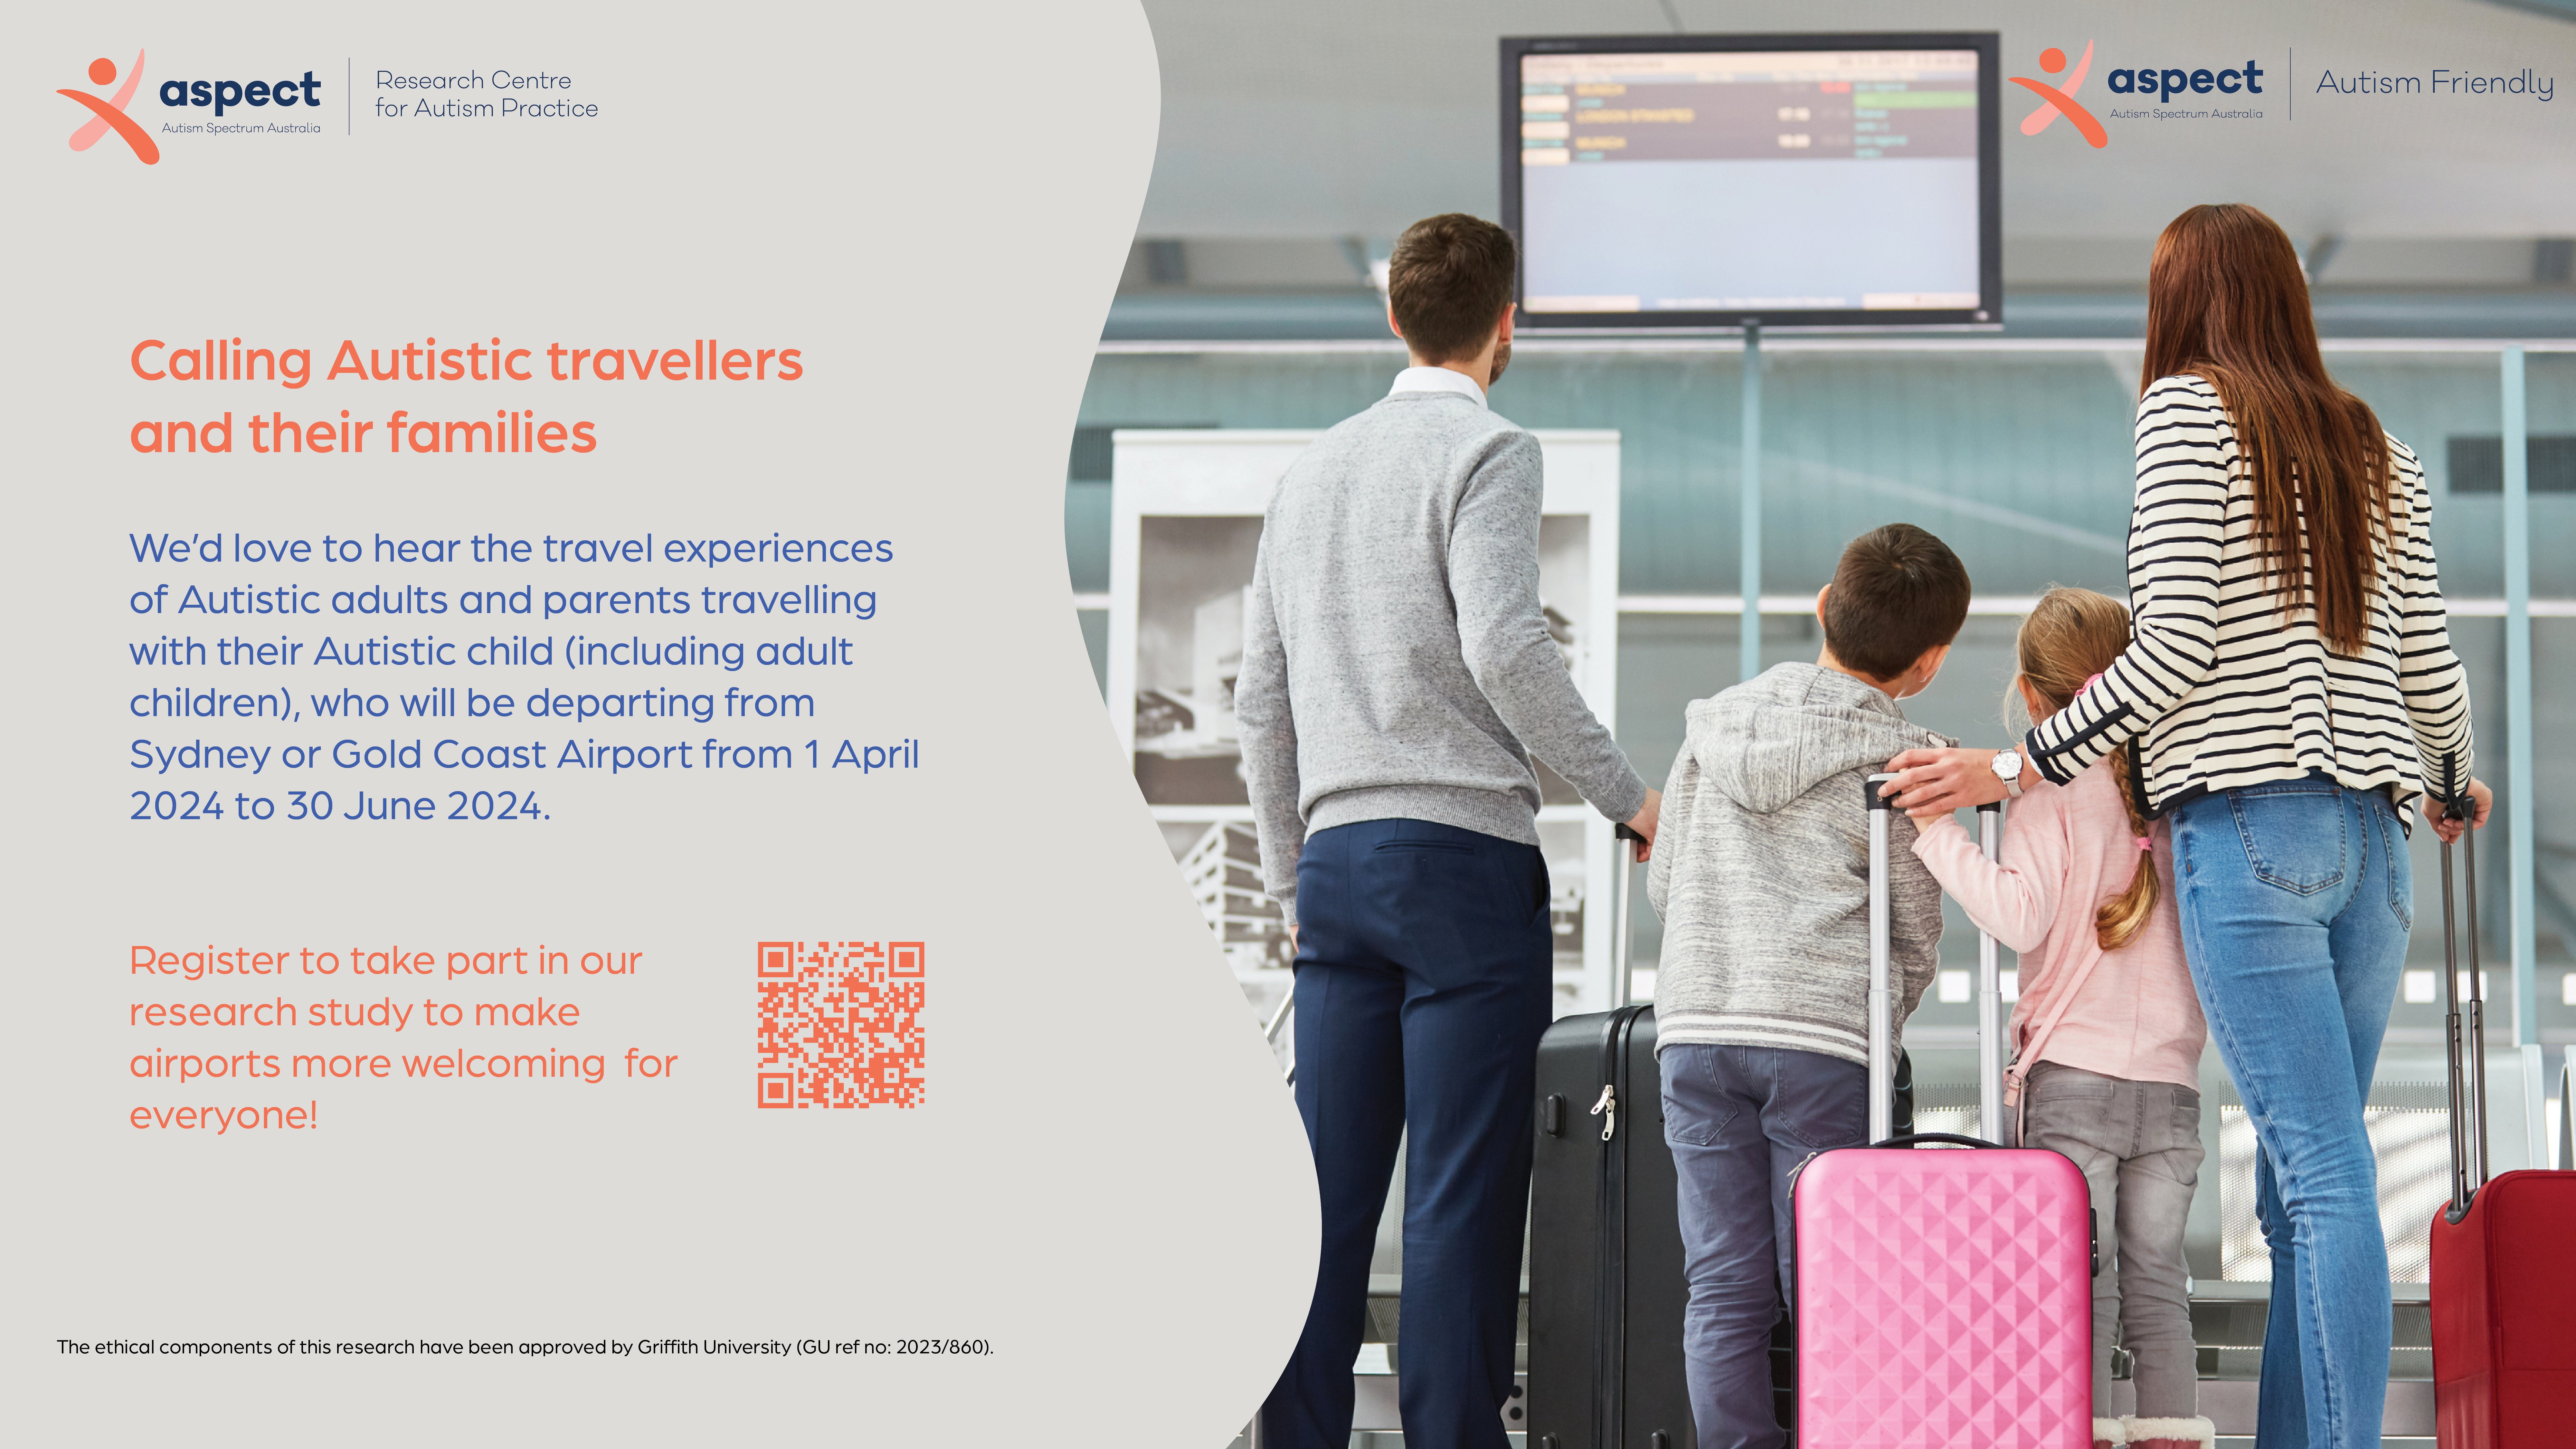 Take part in our study on airports and travel